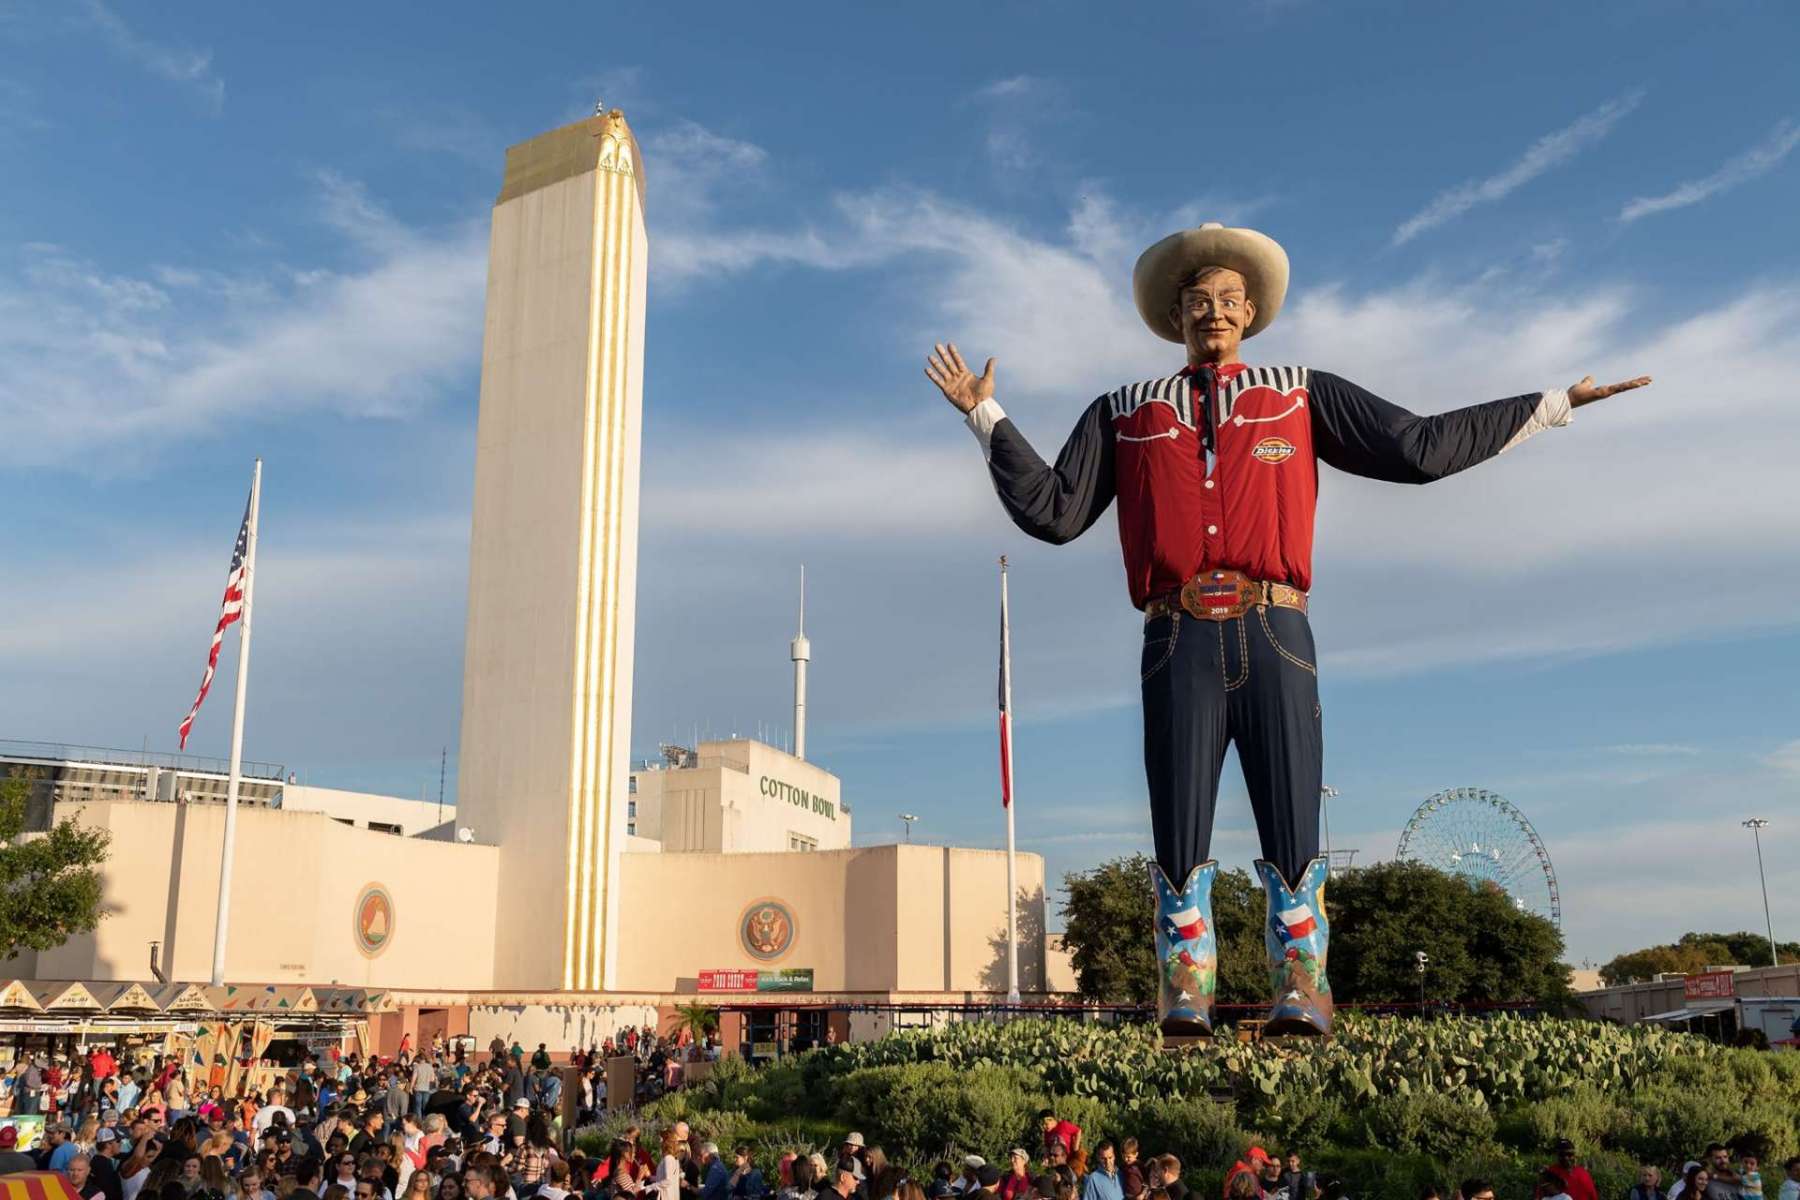 The Complete Festival Guide to the 2021 State Fair of Texas